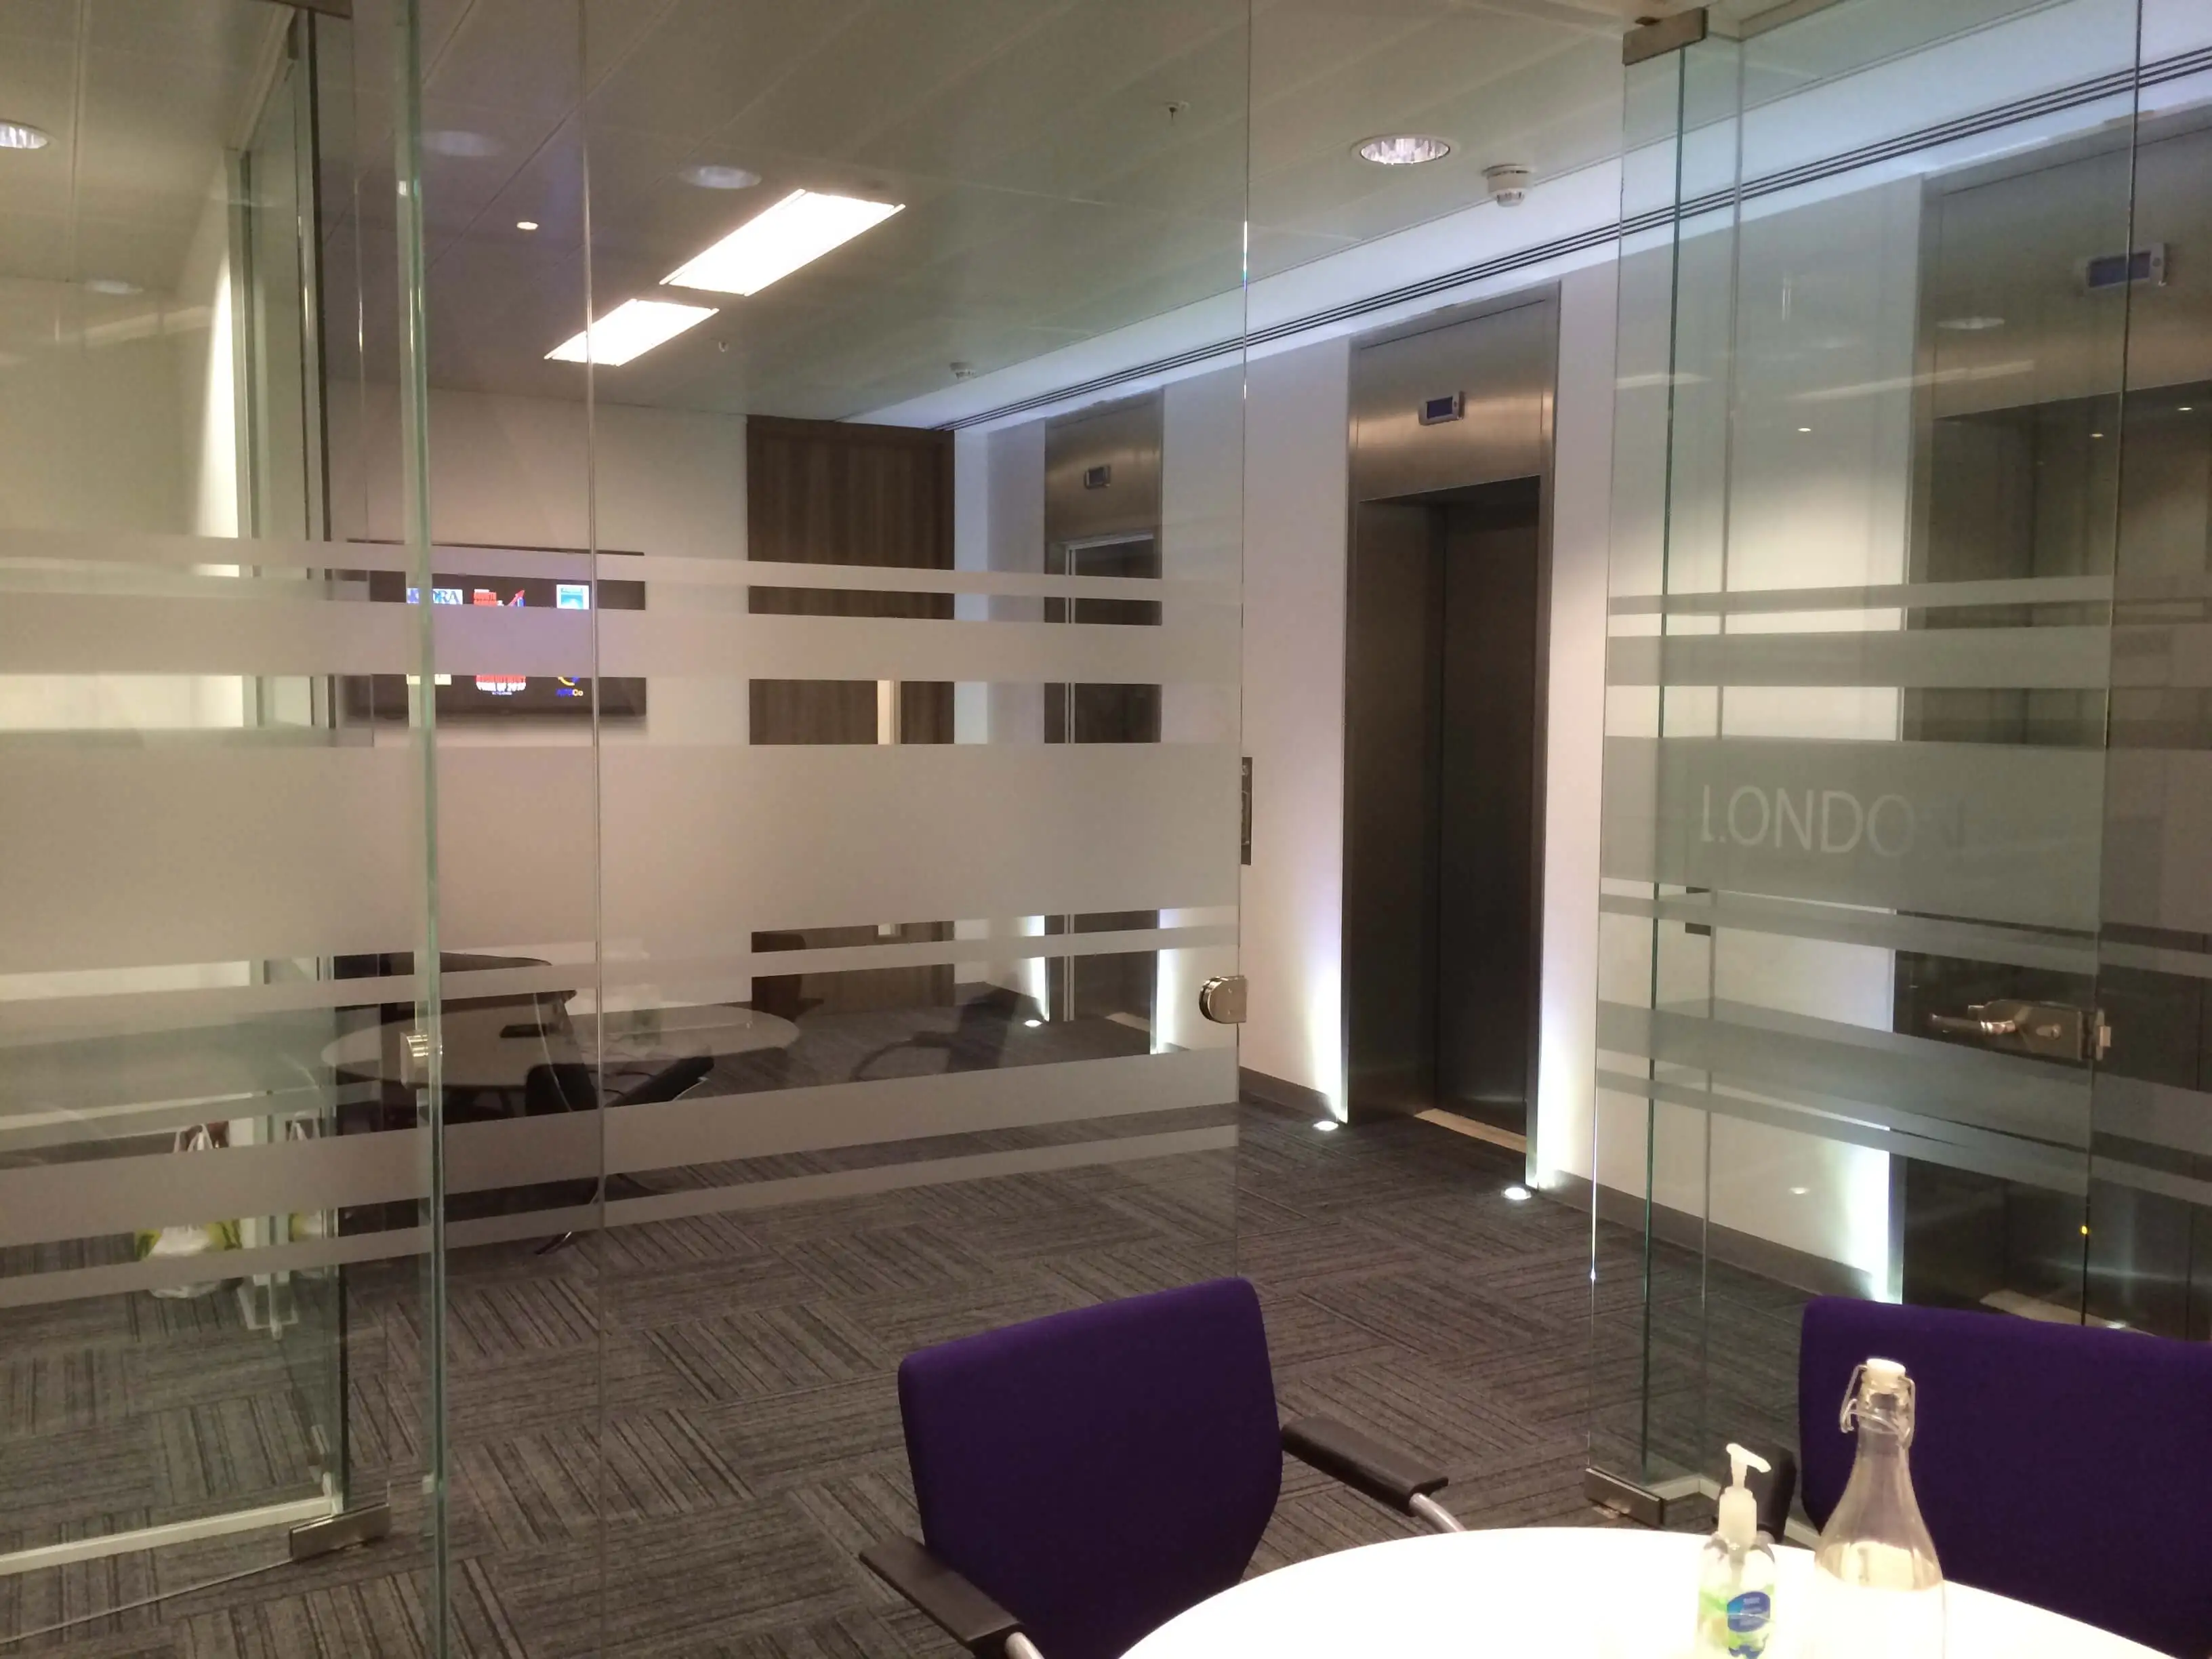 Waiting area and meeting room space with glass partitions